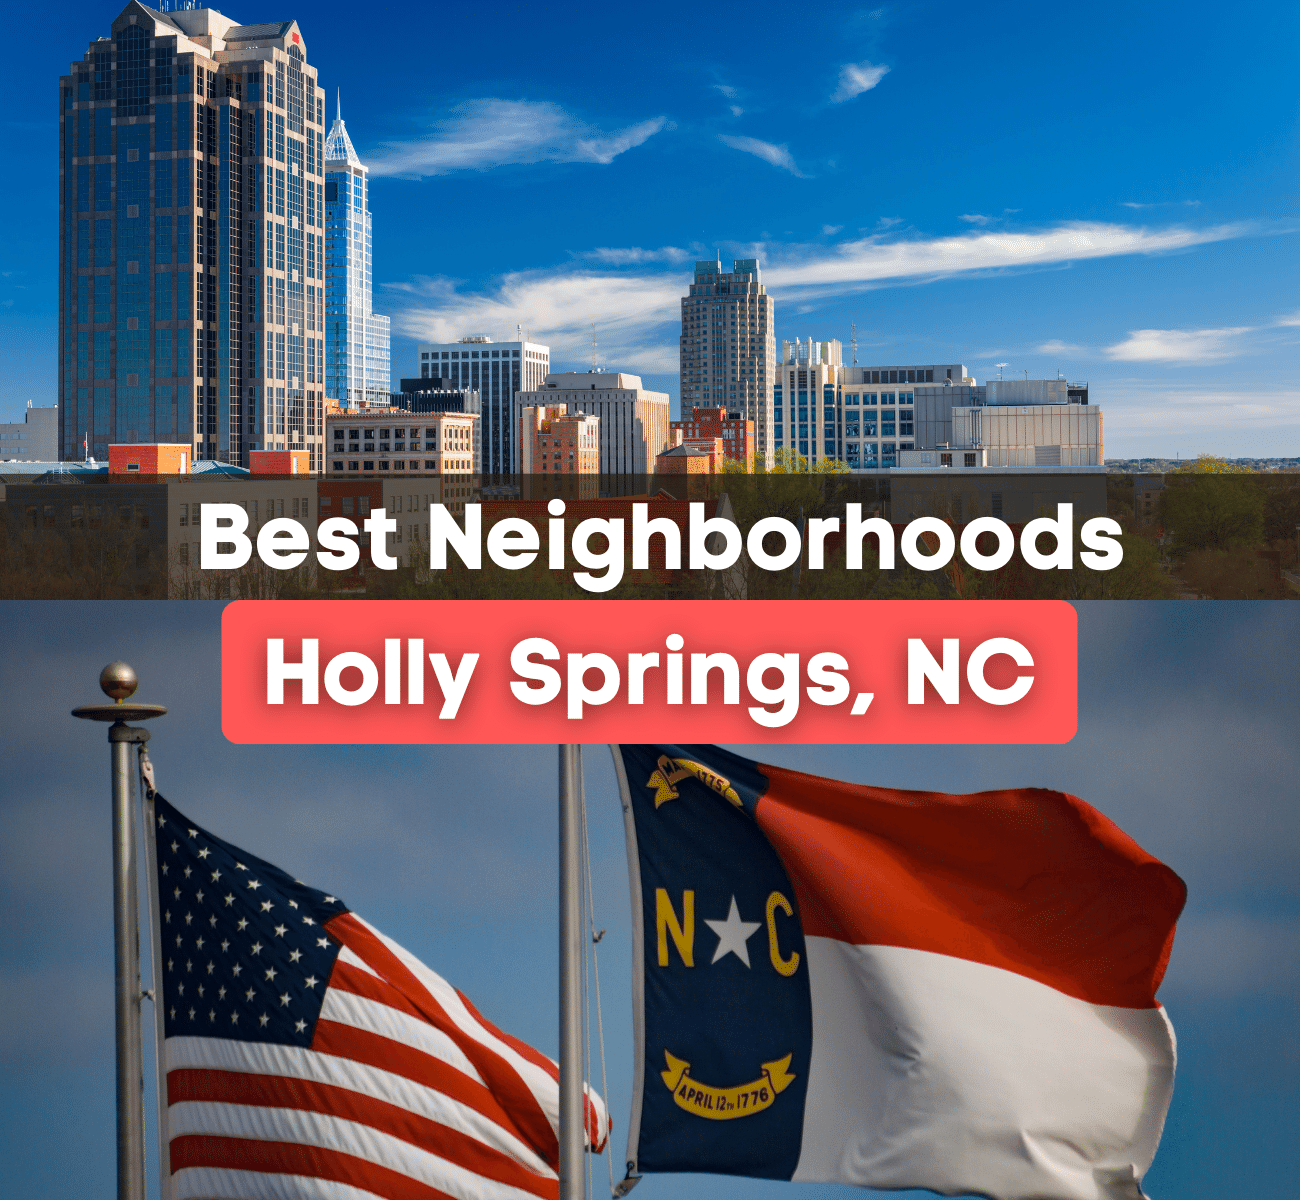 Living in Holly Springs, NC: A Guide to the 11 Best Neighborhoods in Holly Springs